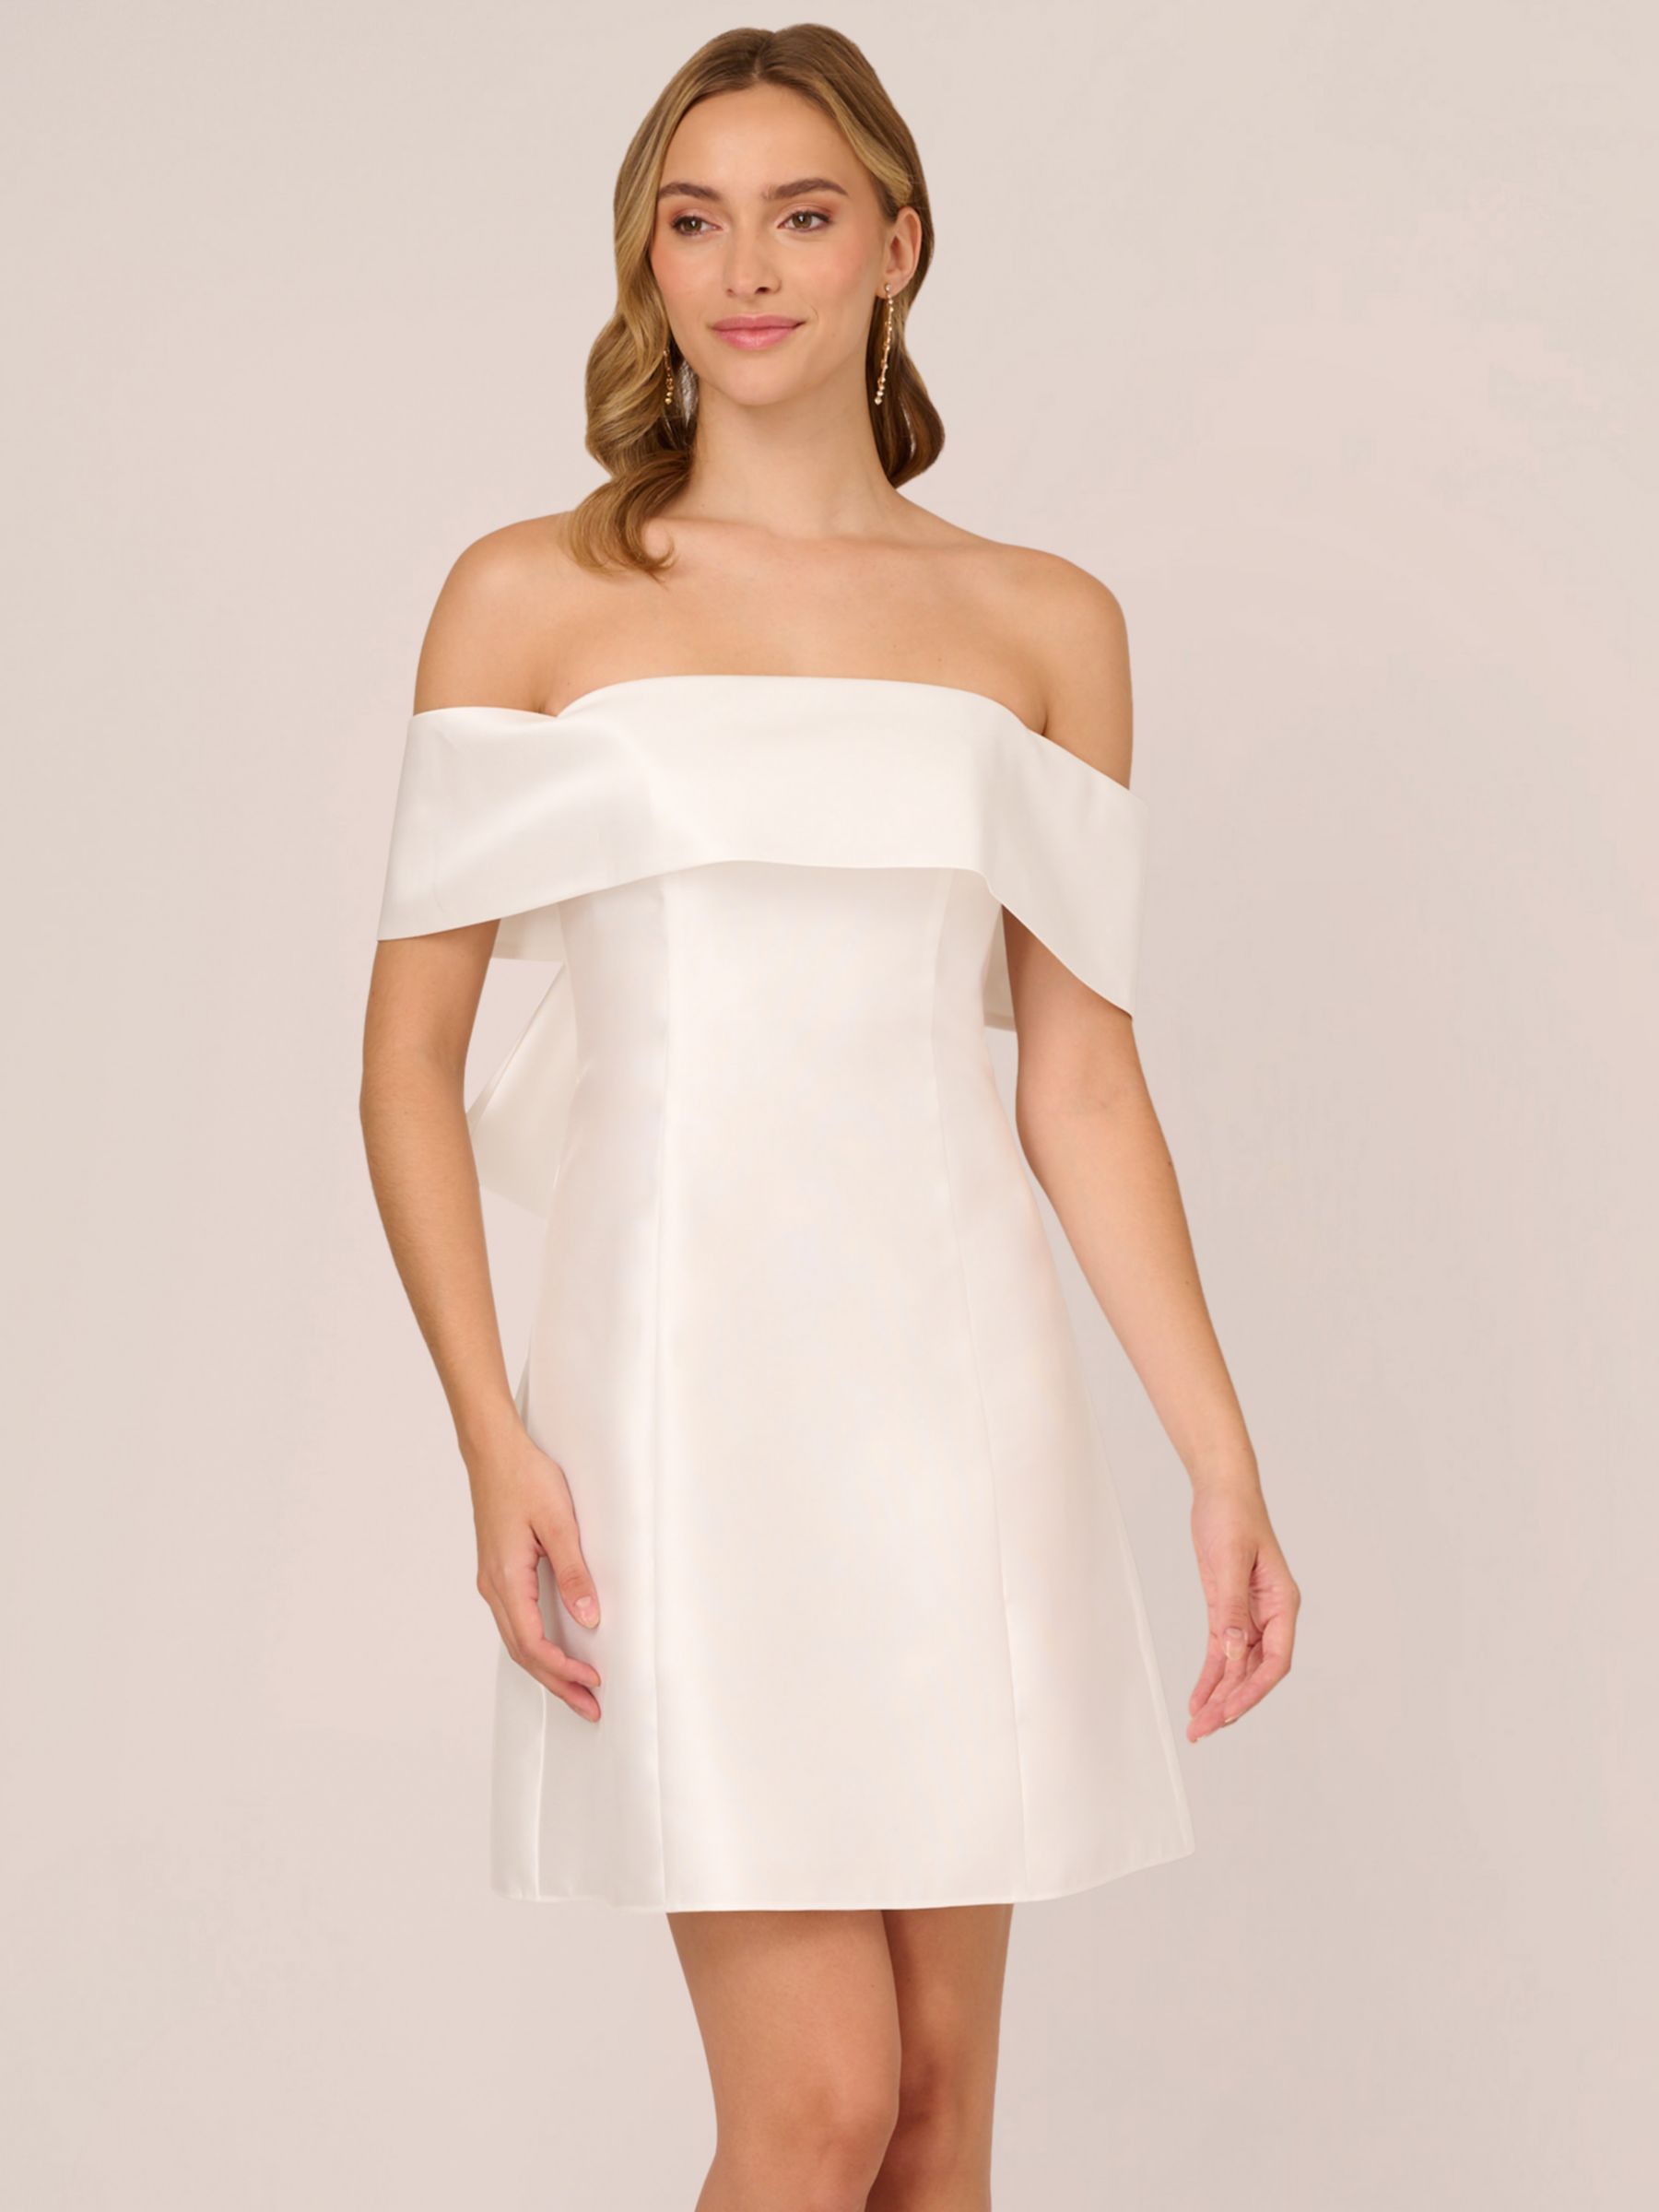 Buy Adrianna Papell Mikado Bow Short Dress, Ivory Online at johnlewis.com